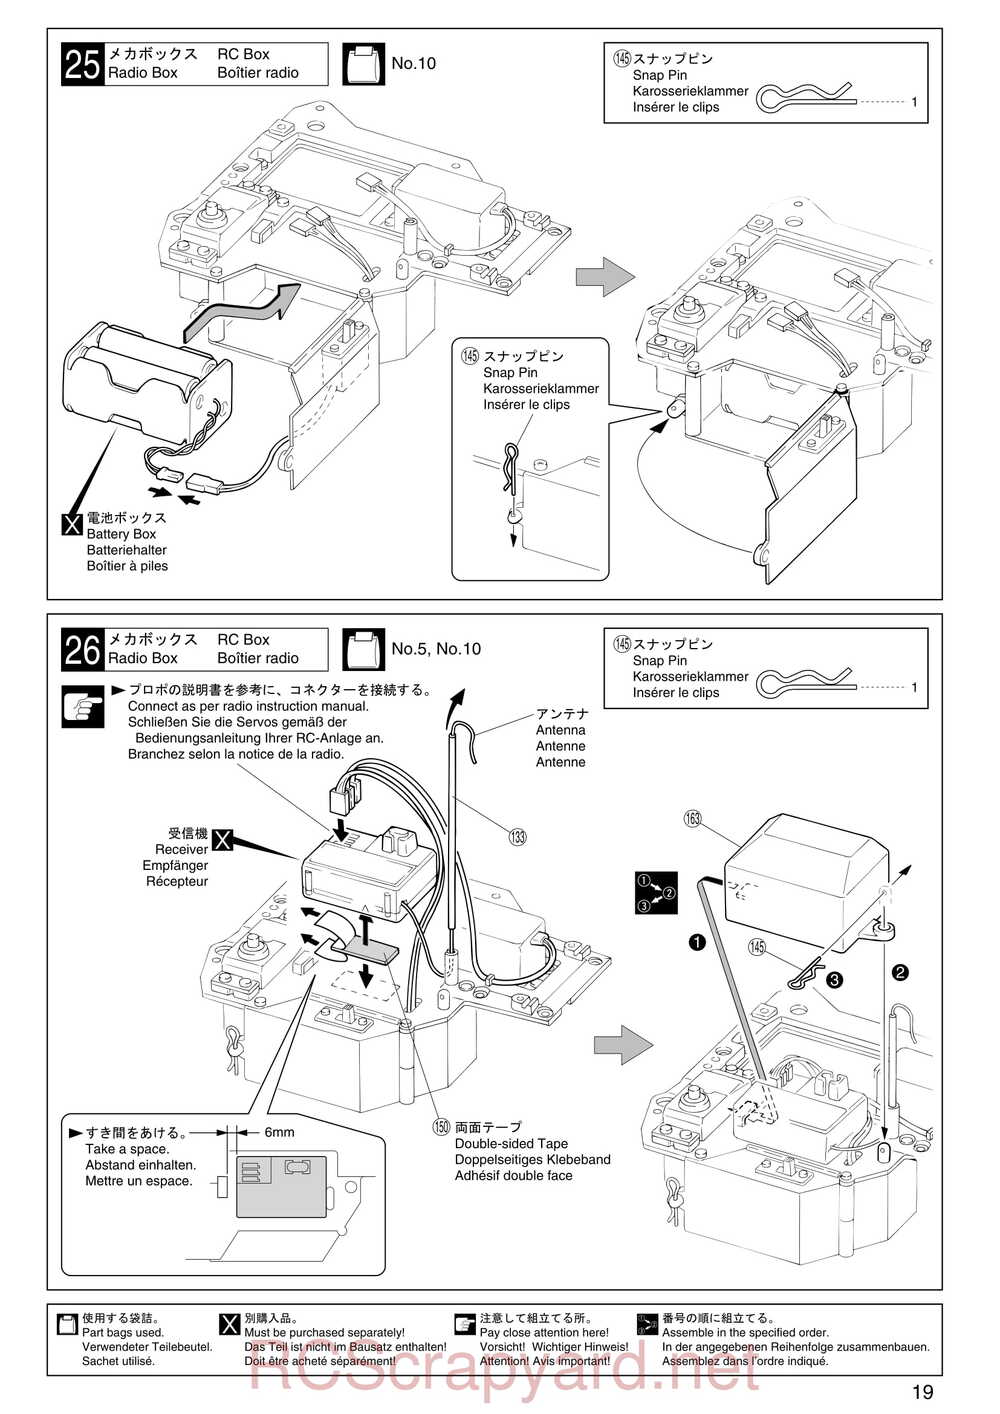 Kyosho - 31122 - V-One S2 - Manual - Page 19